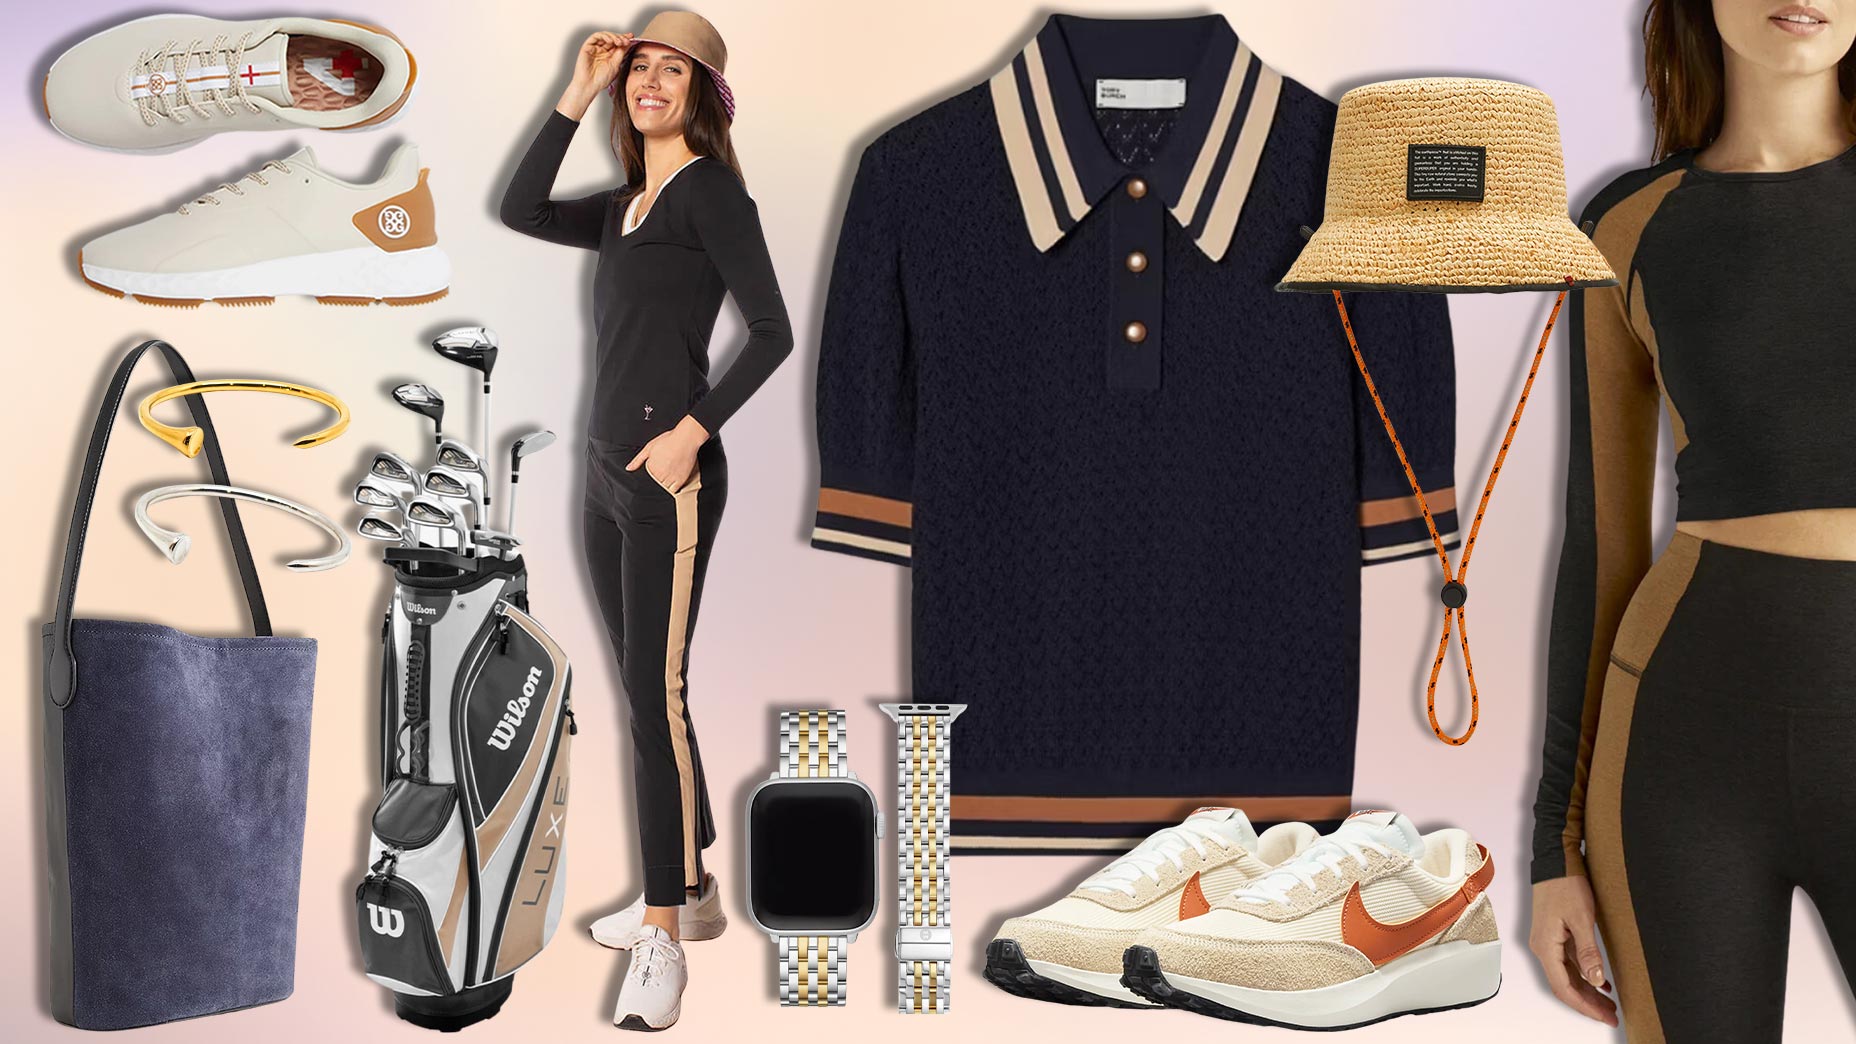 Women’s winter golf fashion and accessories for your round